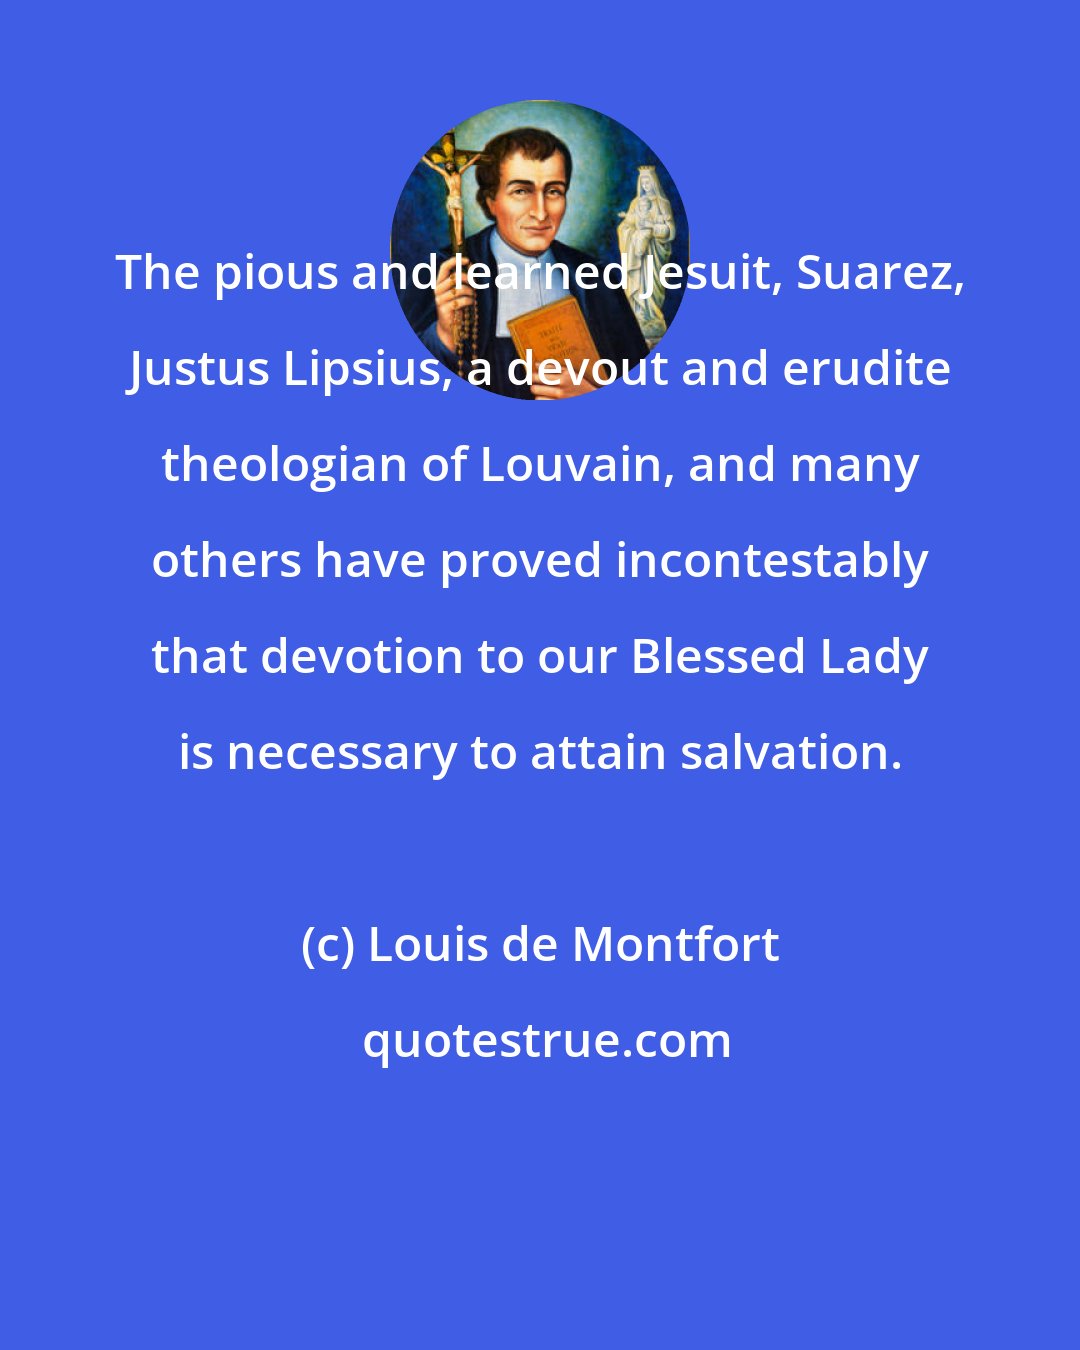 Louis de Montfort: The pious and learned Jesuit, Suarez, Justus Lipsius, a devout and erudite theologian of Louvain, and many others have proved incontestably that devotion to our Blessed Lady is necessary to attain salvation.